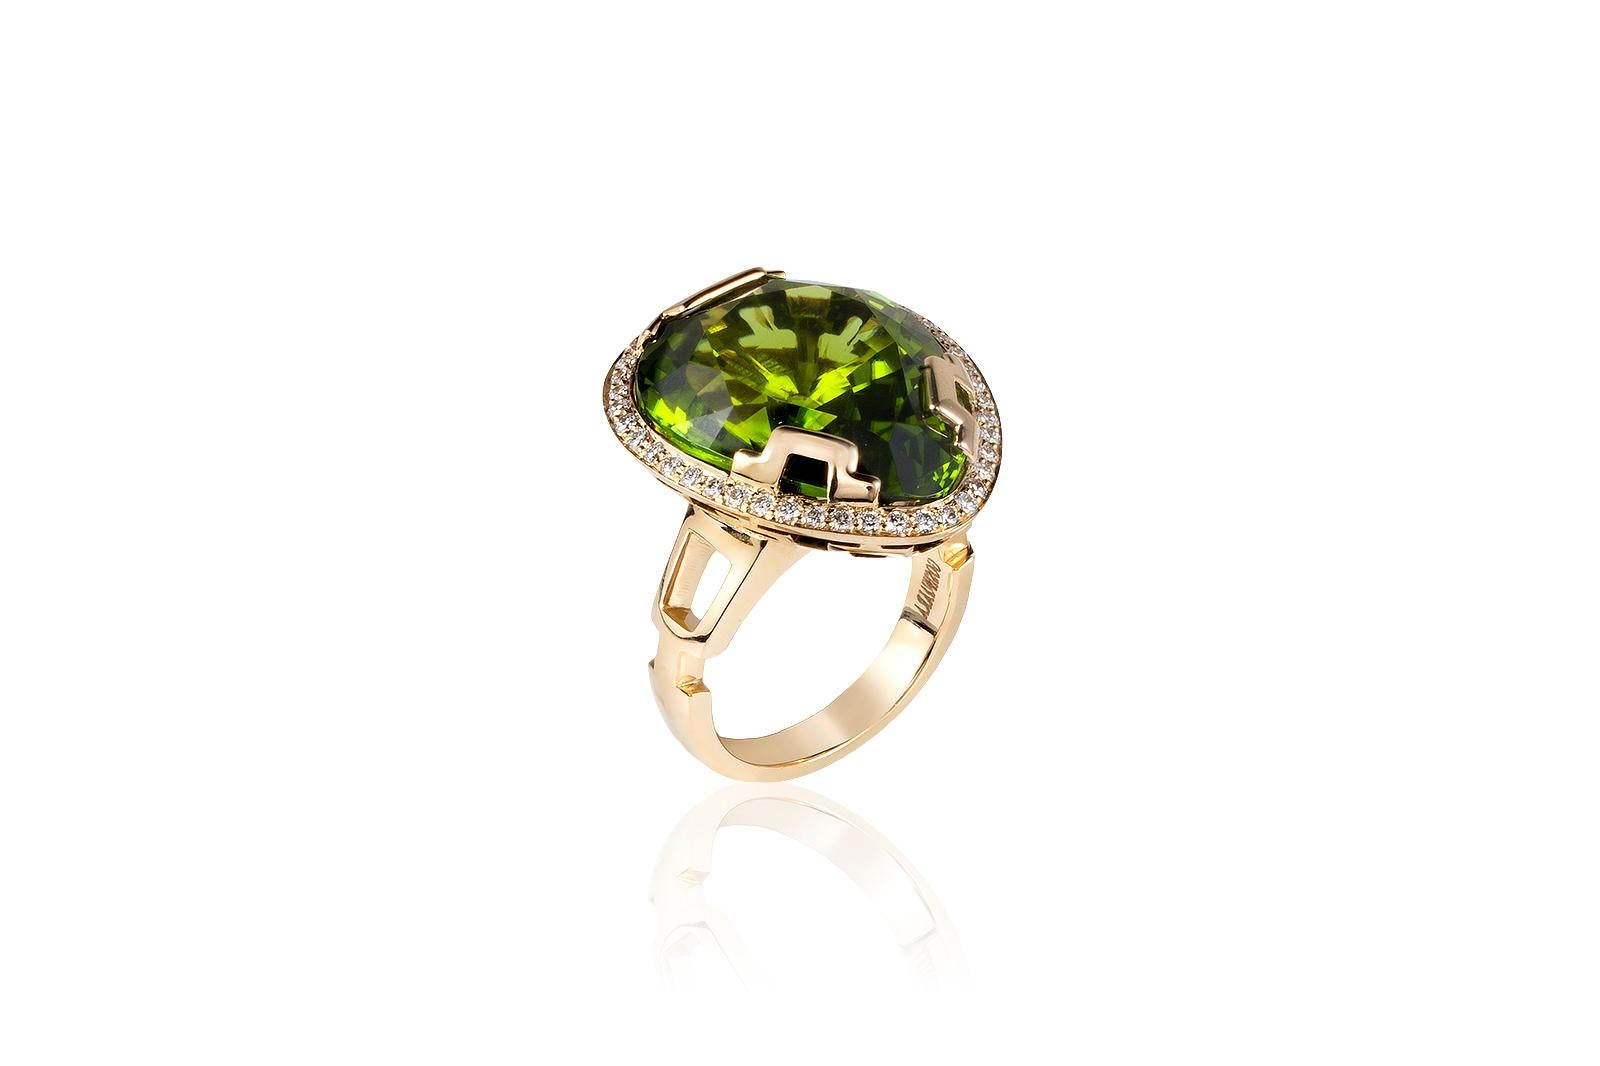 This is a unique Peridot Pear Shape Ring with Diamond in 18k Yellow Gold, from 'G-One' Collection

* Gemstone size: 20.60 x 17.90 mm 
* Gemstone: 100% Earth Mined 
* Approx. gemstone Weight: 22.53 Carats (Peridot)

* 100% Natural Earth-Mined